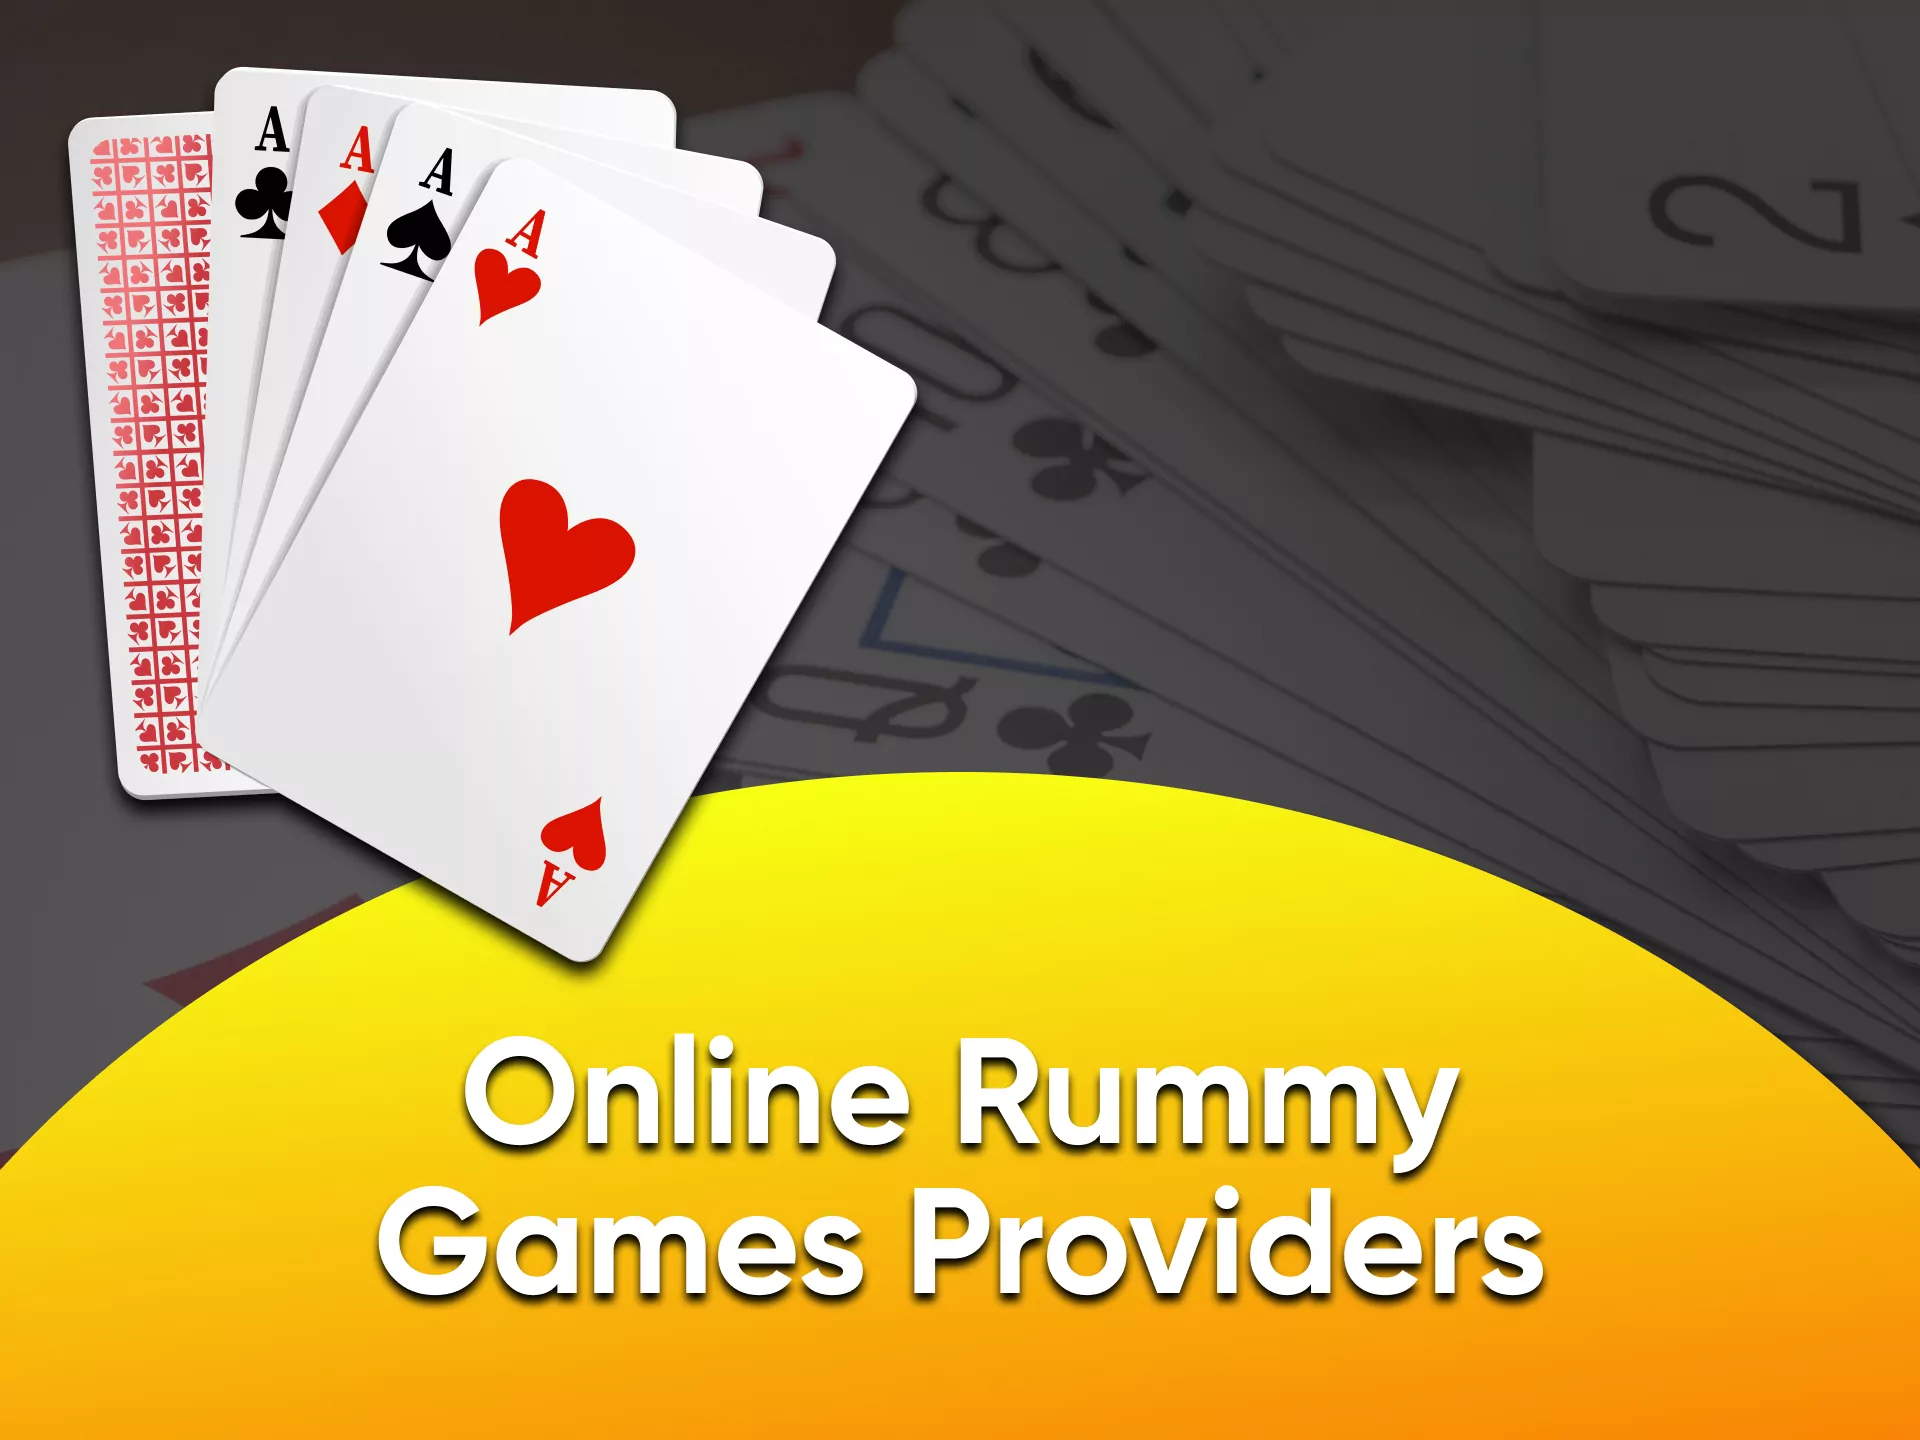 Choose the right service to play Rummy.